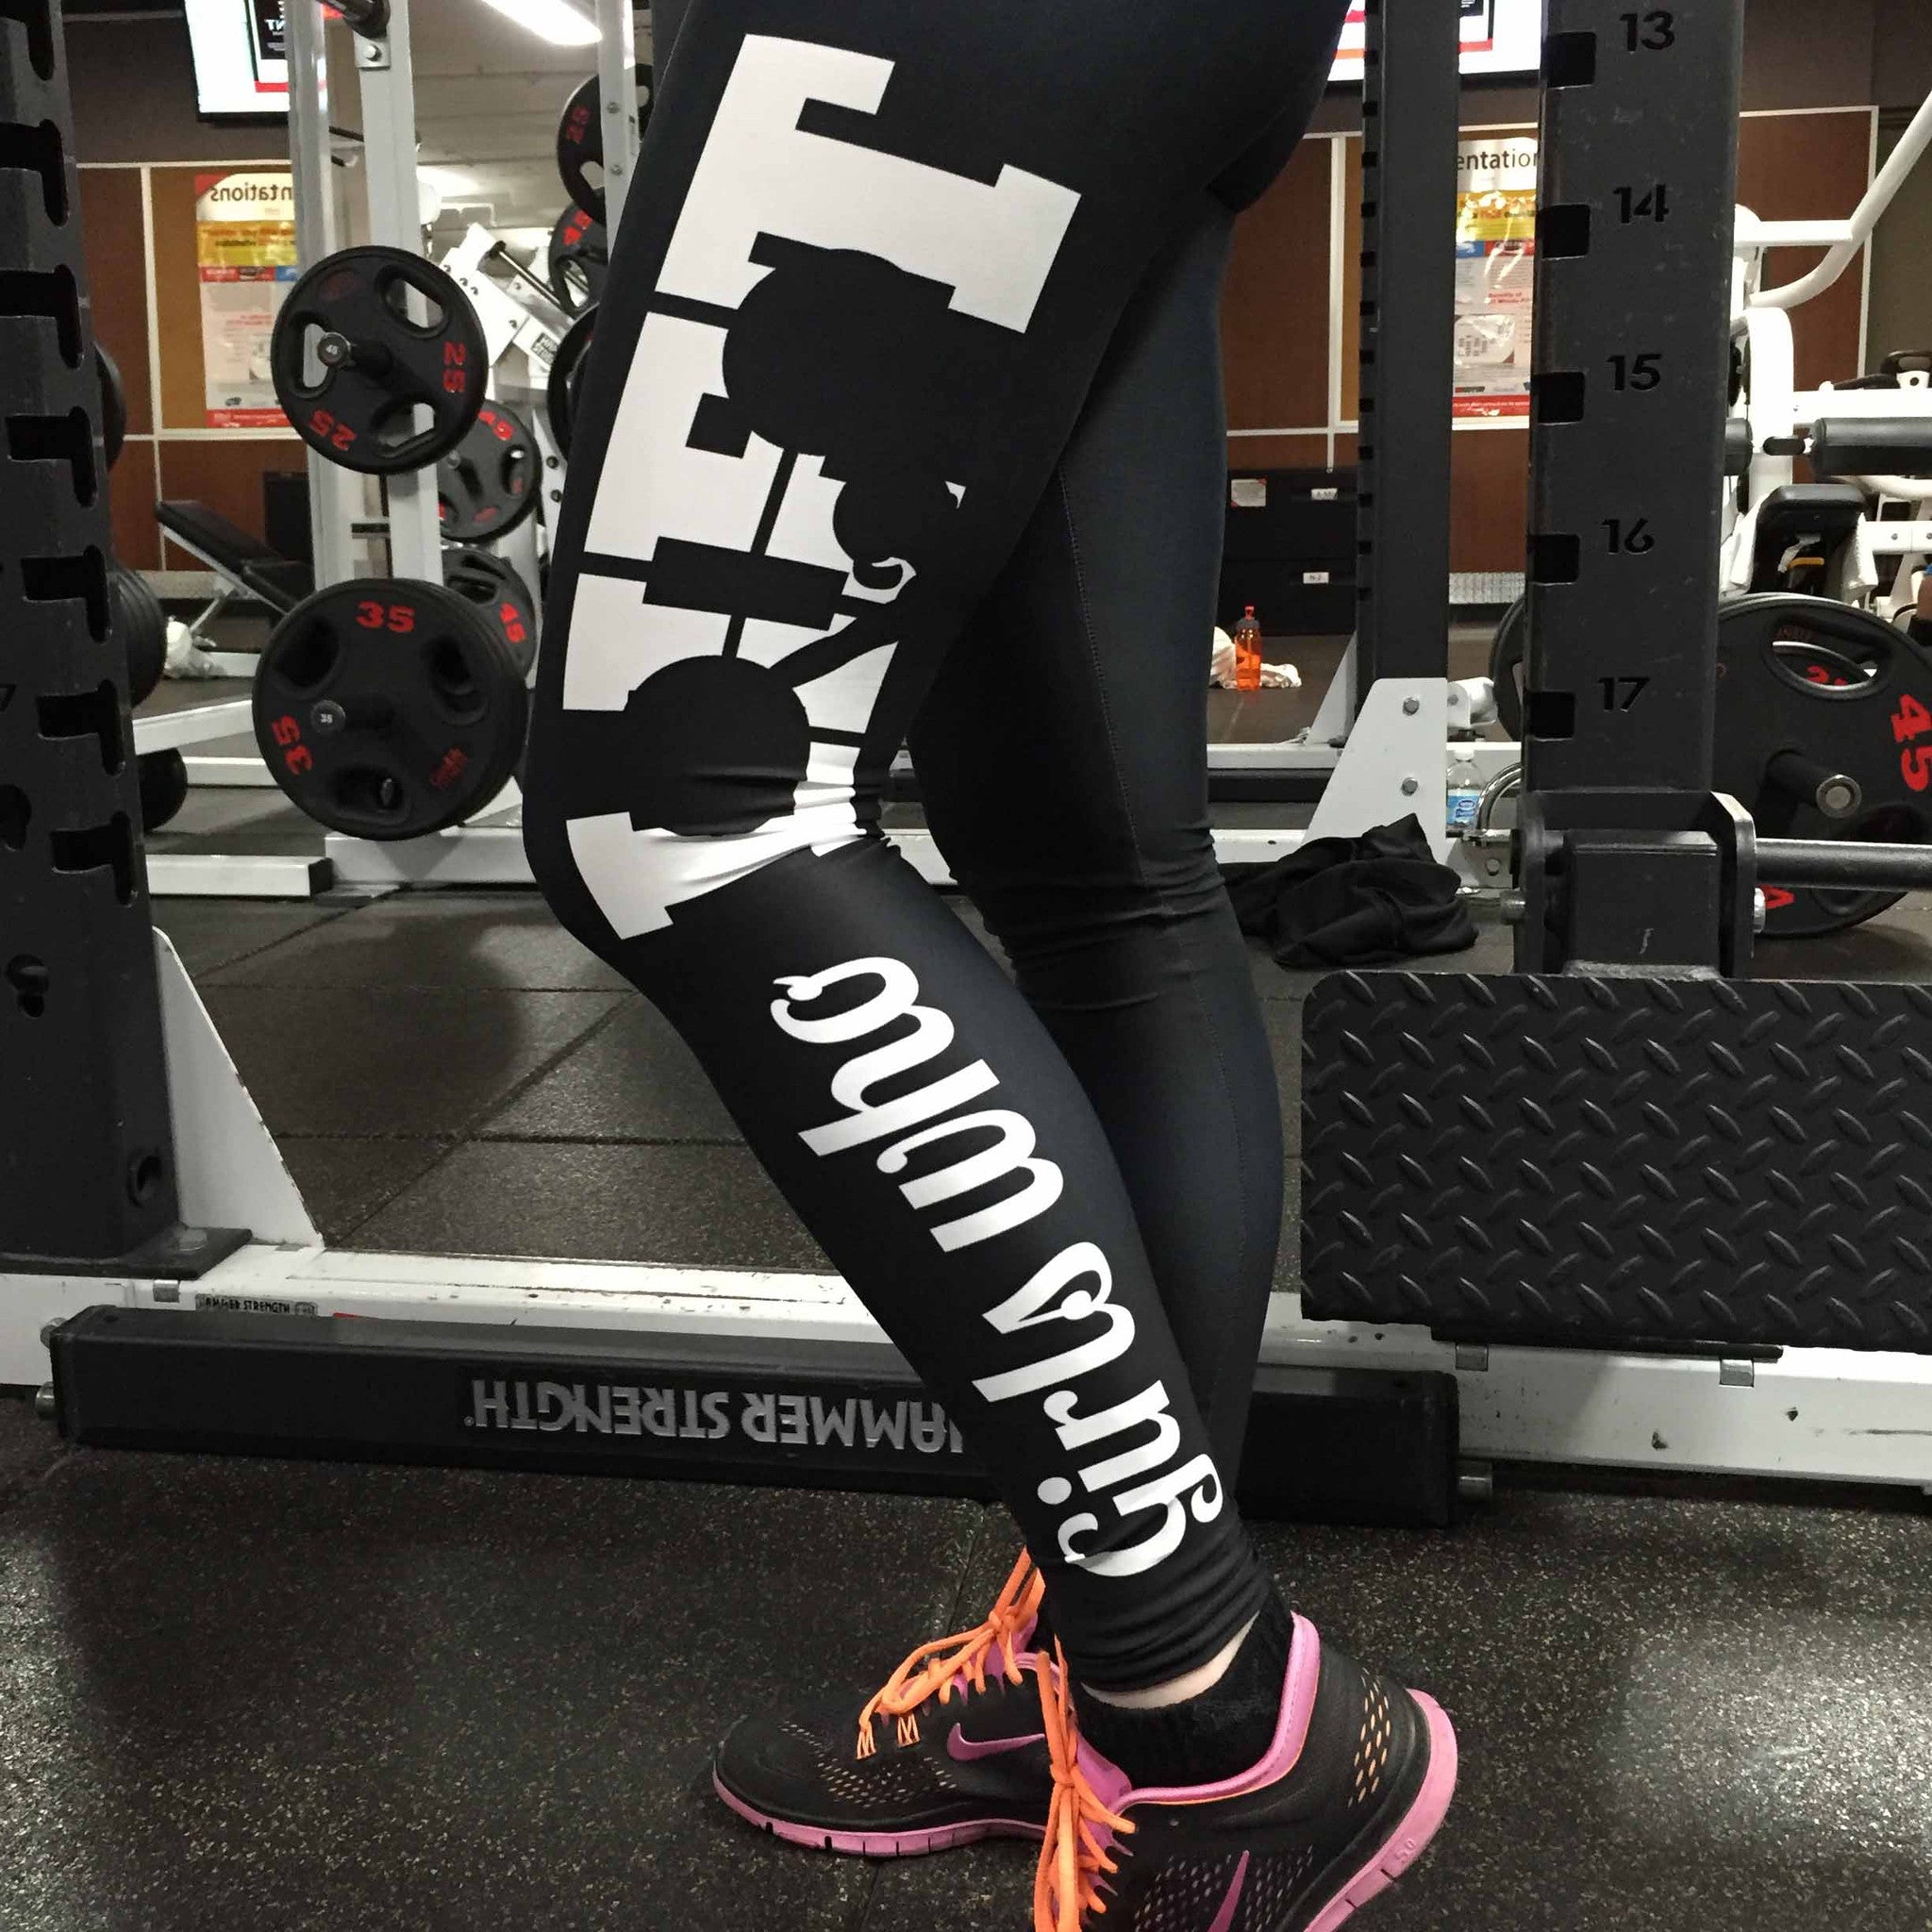 Leggings For Lifting Weights  International Society of Precision  Agriculture